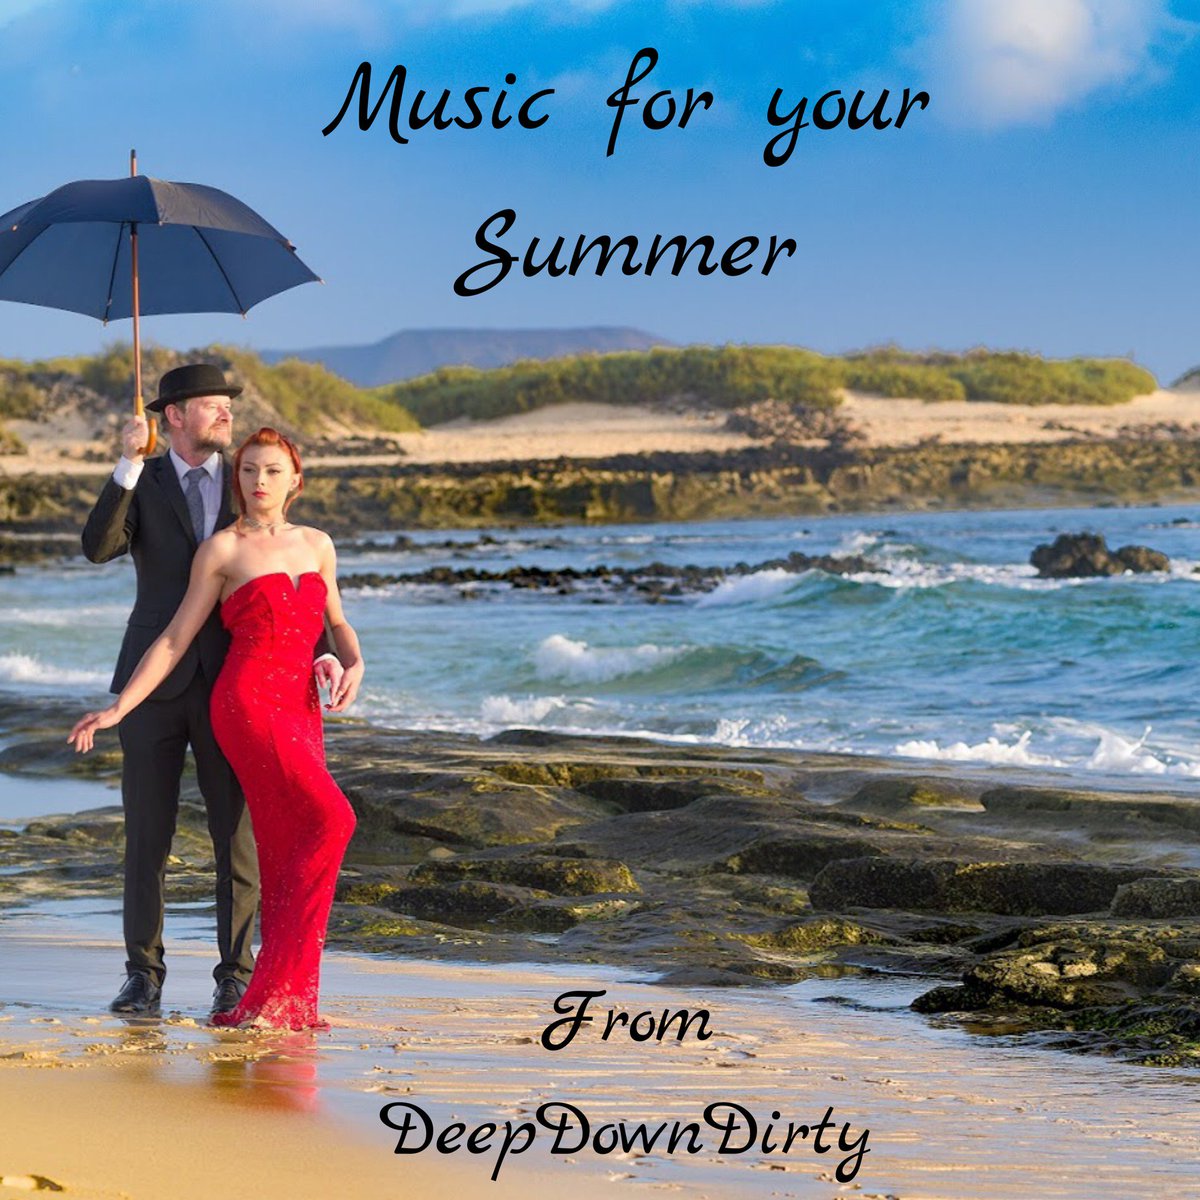 #DiscoverNewMusic with #DeepDownDirty's @SoundCloud #playlist of our upcoming releases over the summer: soundcloud.com/deepdowndirty-…
Inc music by the tagged and more!
#housemusic #techhouse #deephouse #melodictechno #indieelectronic